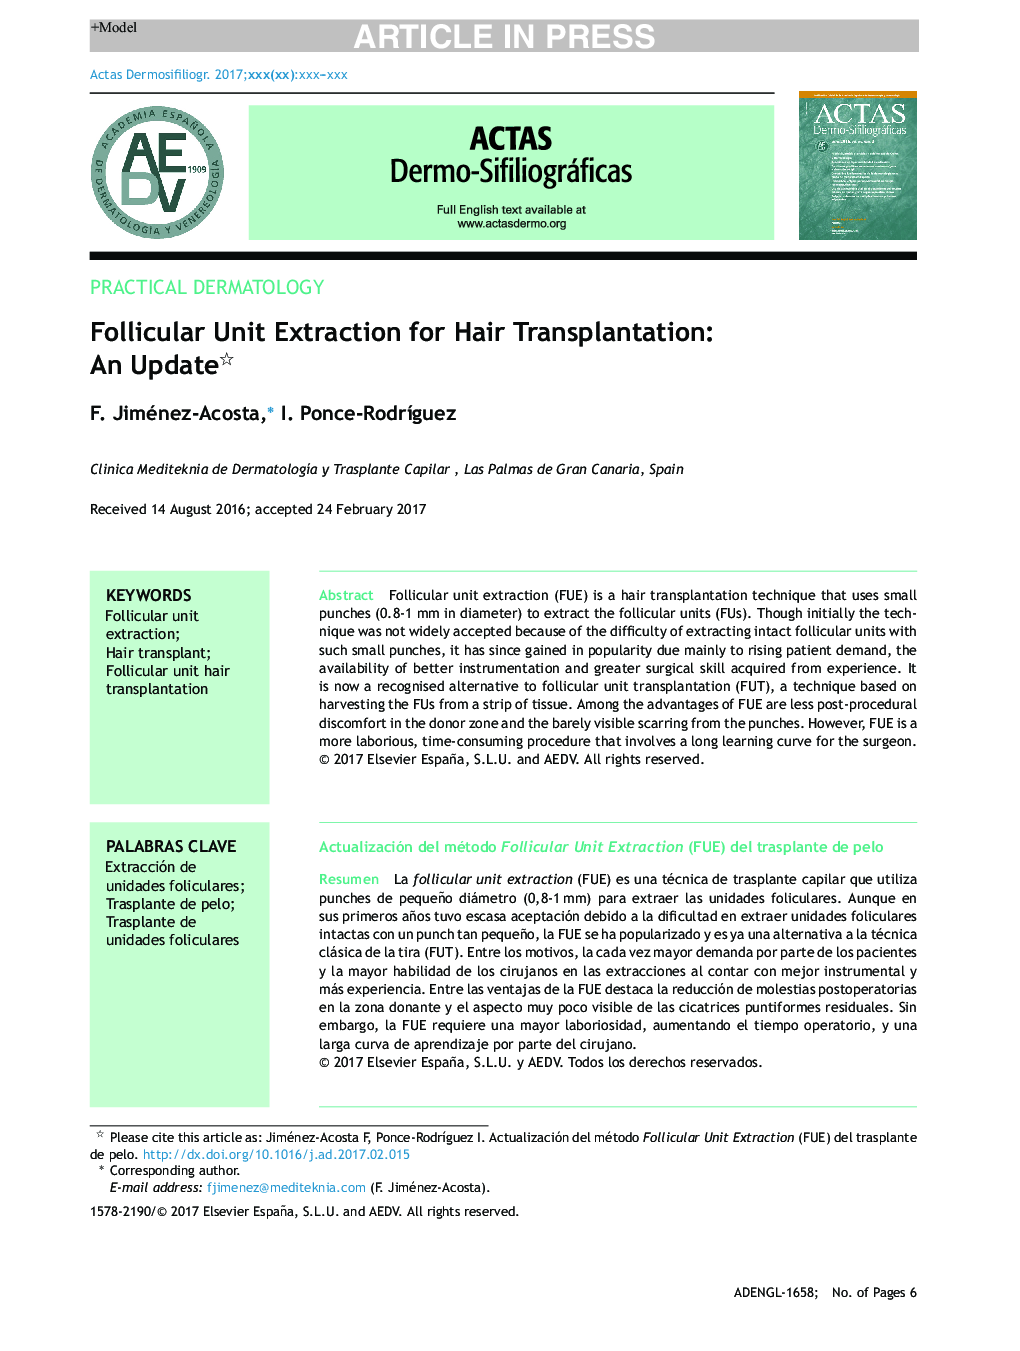 Follicular Unit Extraction for Hair Transplantation: An Update